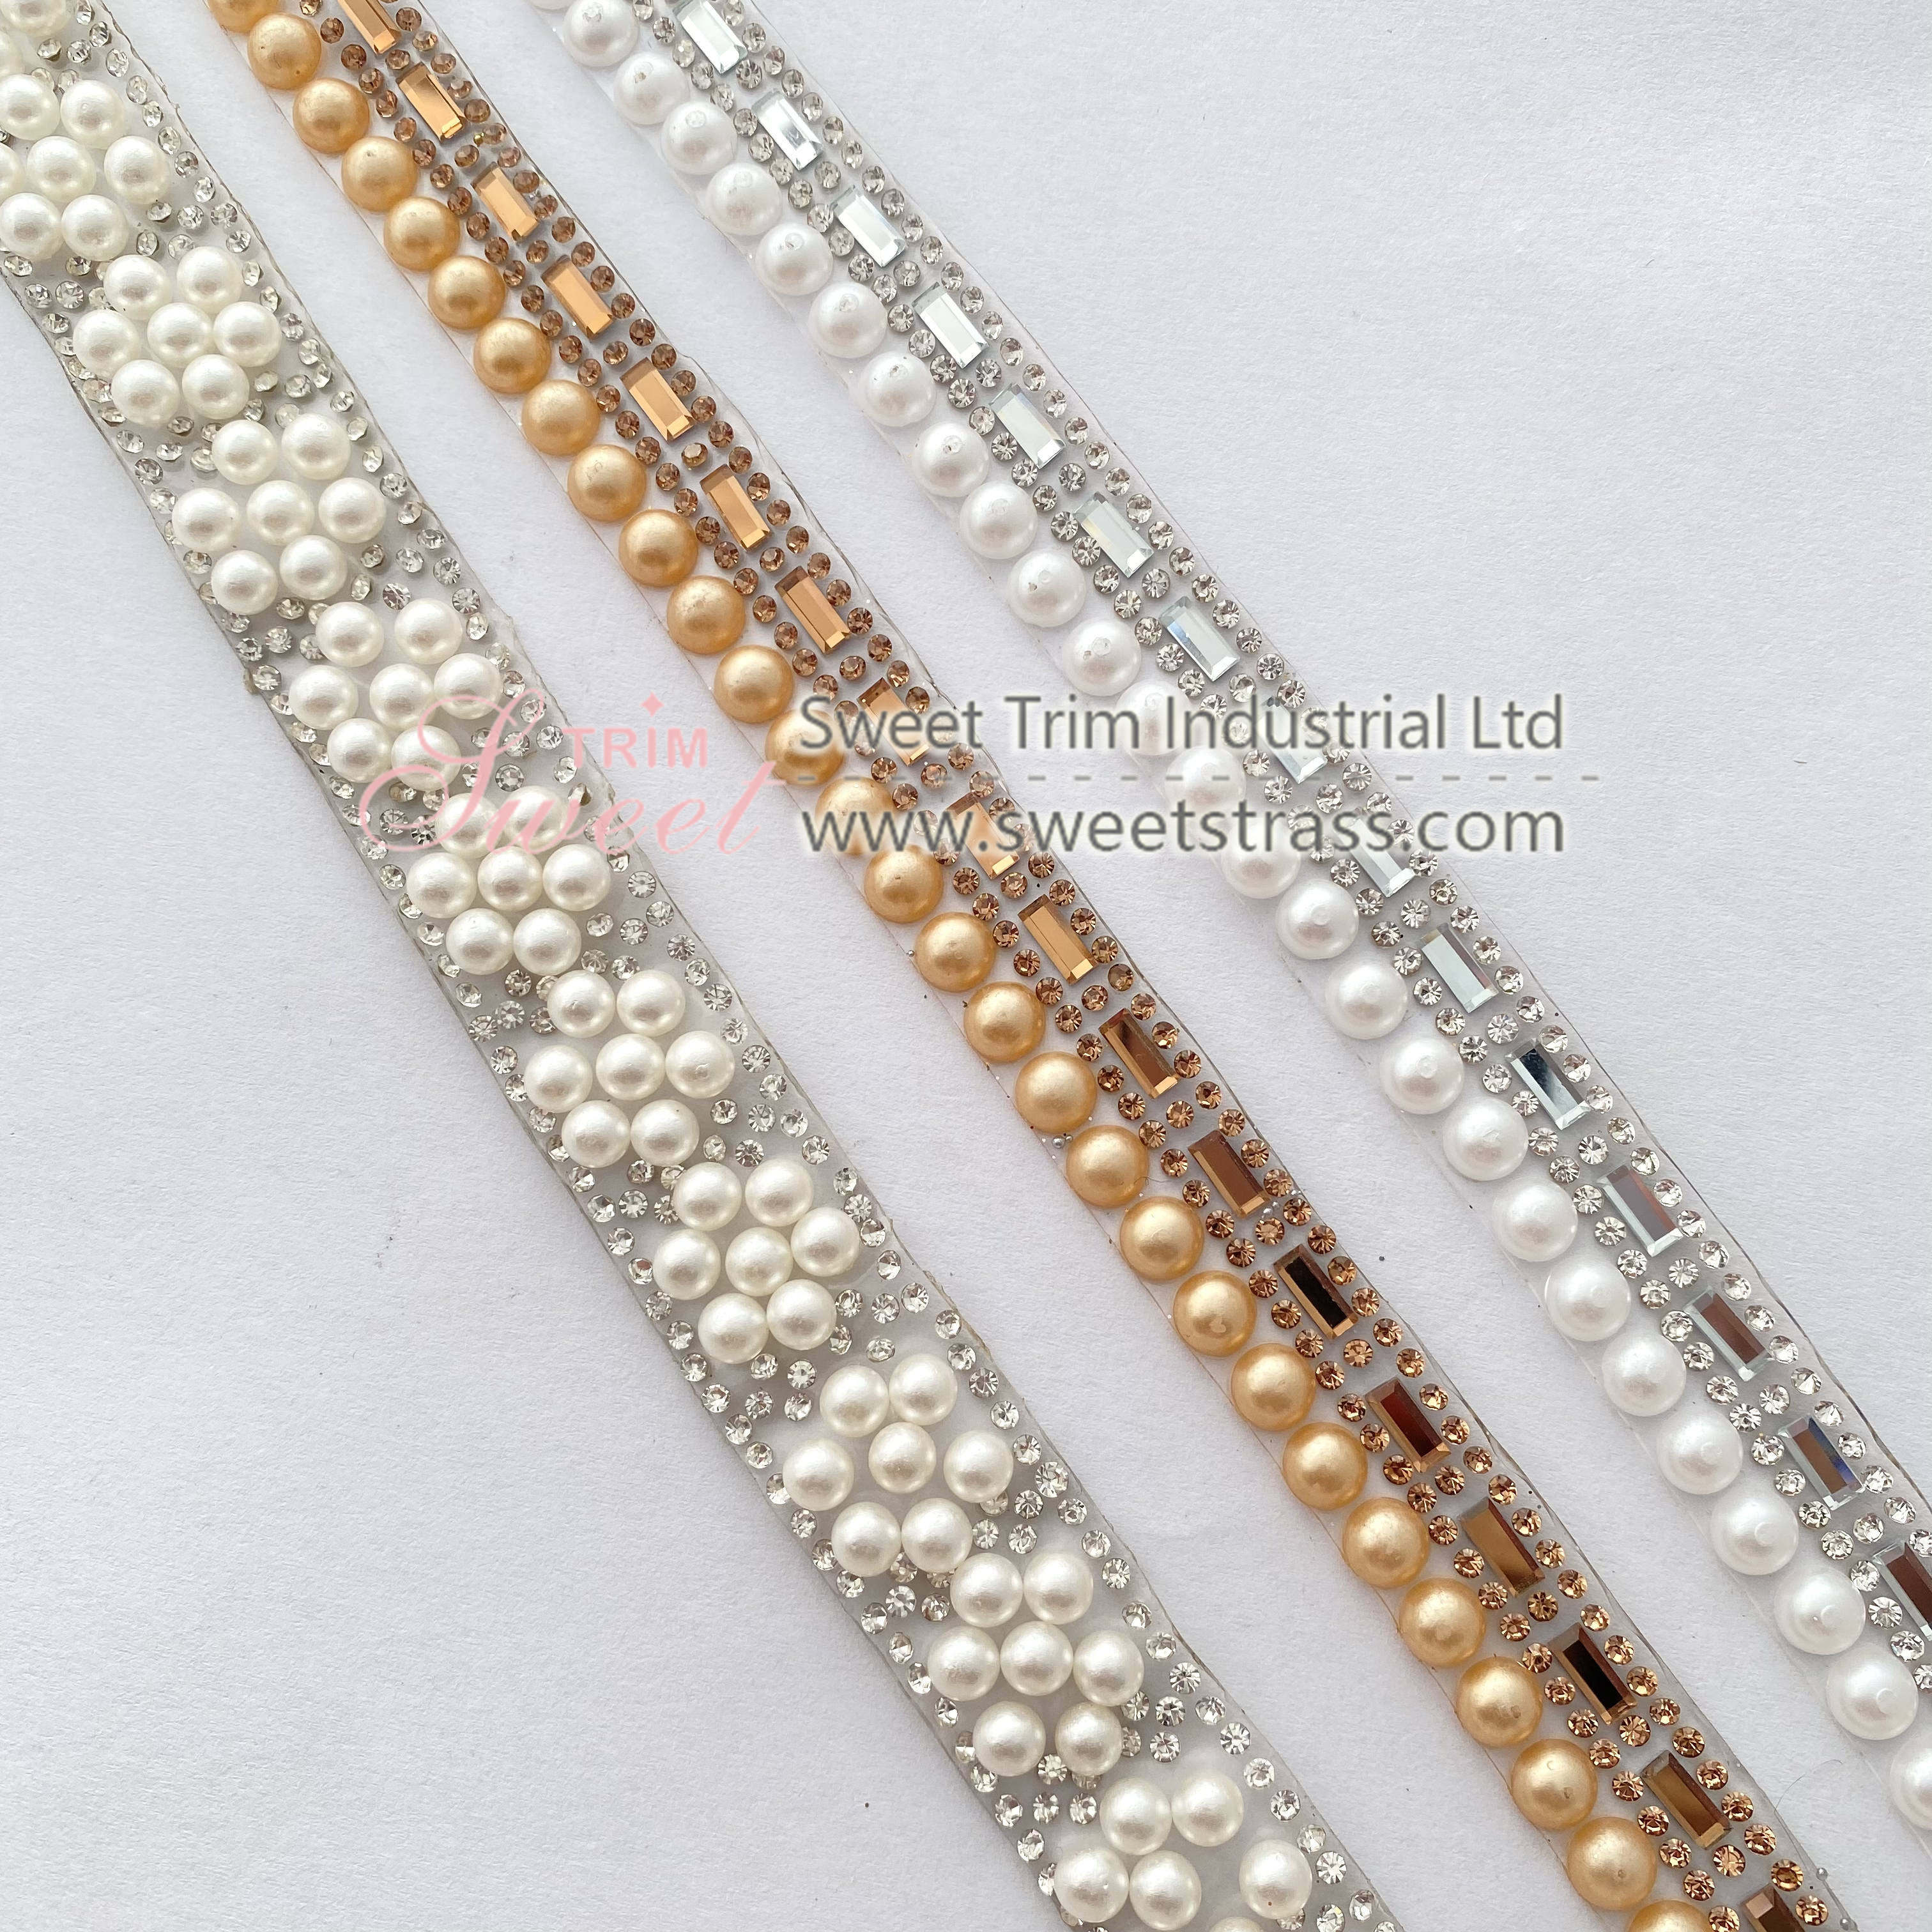 <b>Clear Crystal Adhesive Tape Strass Hot Fix Trimming Band For Dress Deals In Wholesale</b>